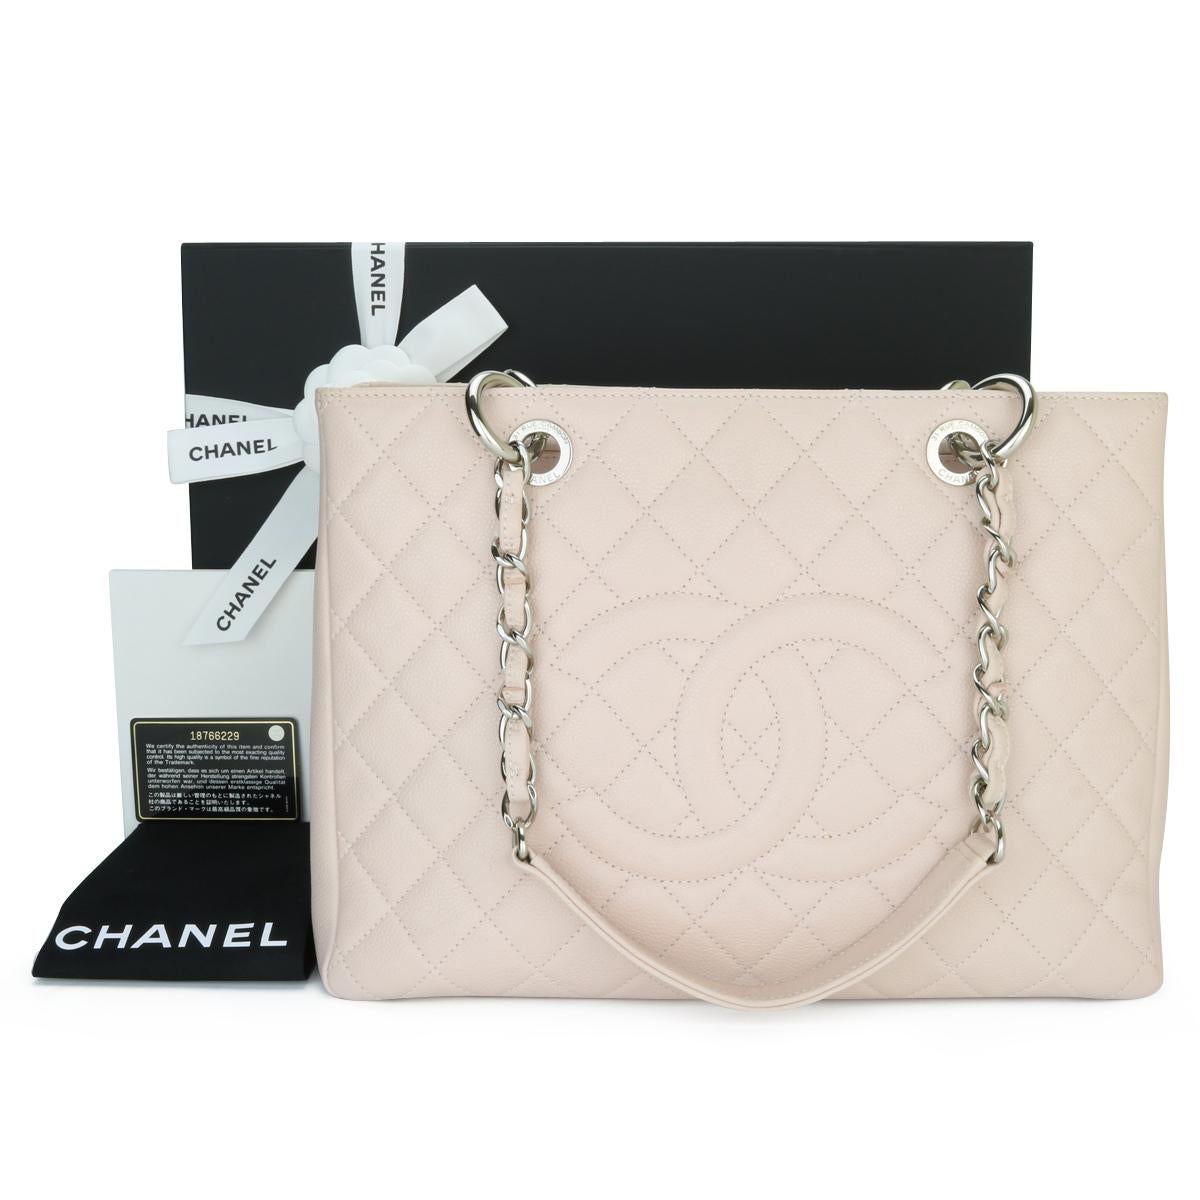 CHANEL Grand Shopping Tote (GST) Light Pink Caviar with Silver Hardware 2014.

This bag is in excellent condition, the bag still holds its original shape, and the hardware is still very shiny.

As Chanel has discontinued the Grand Shopping Tote